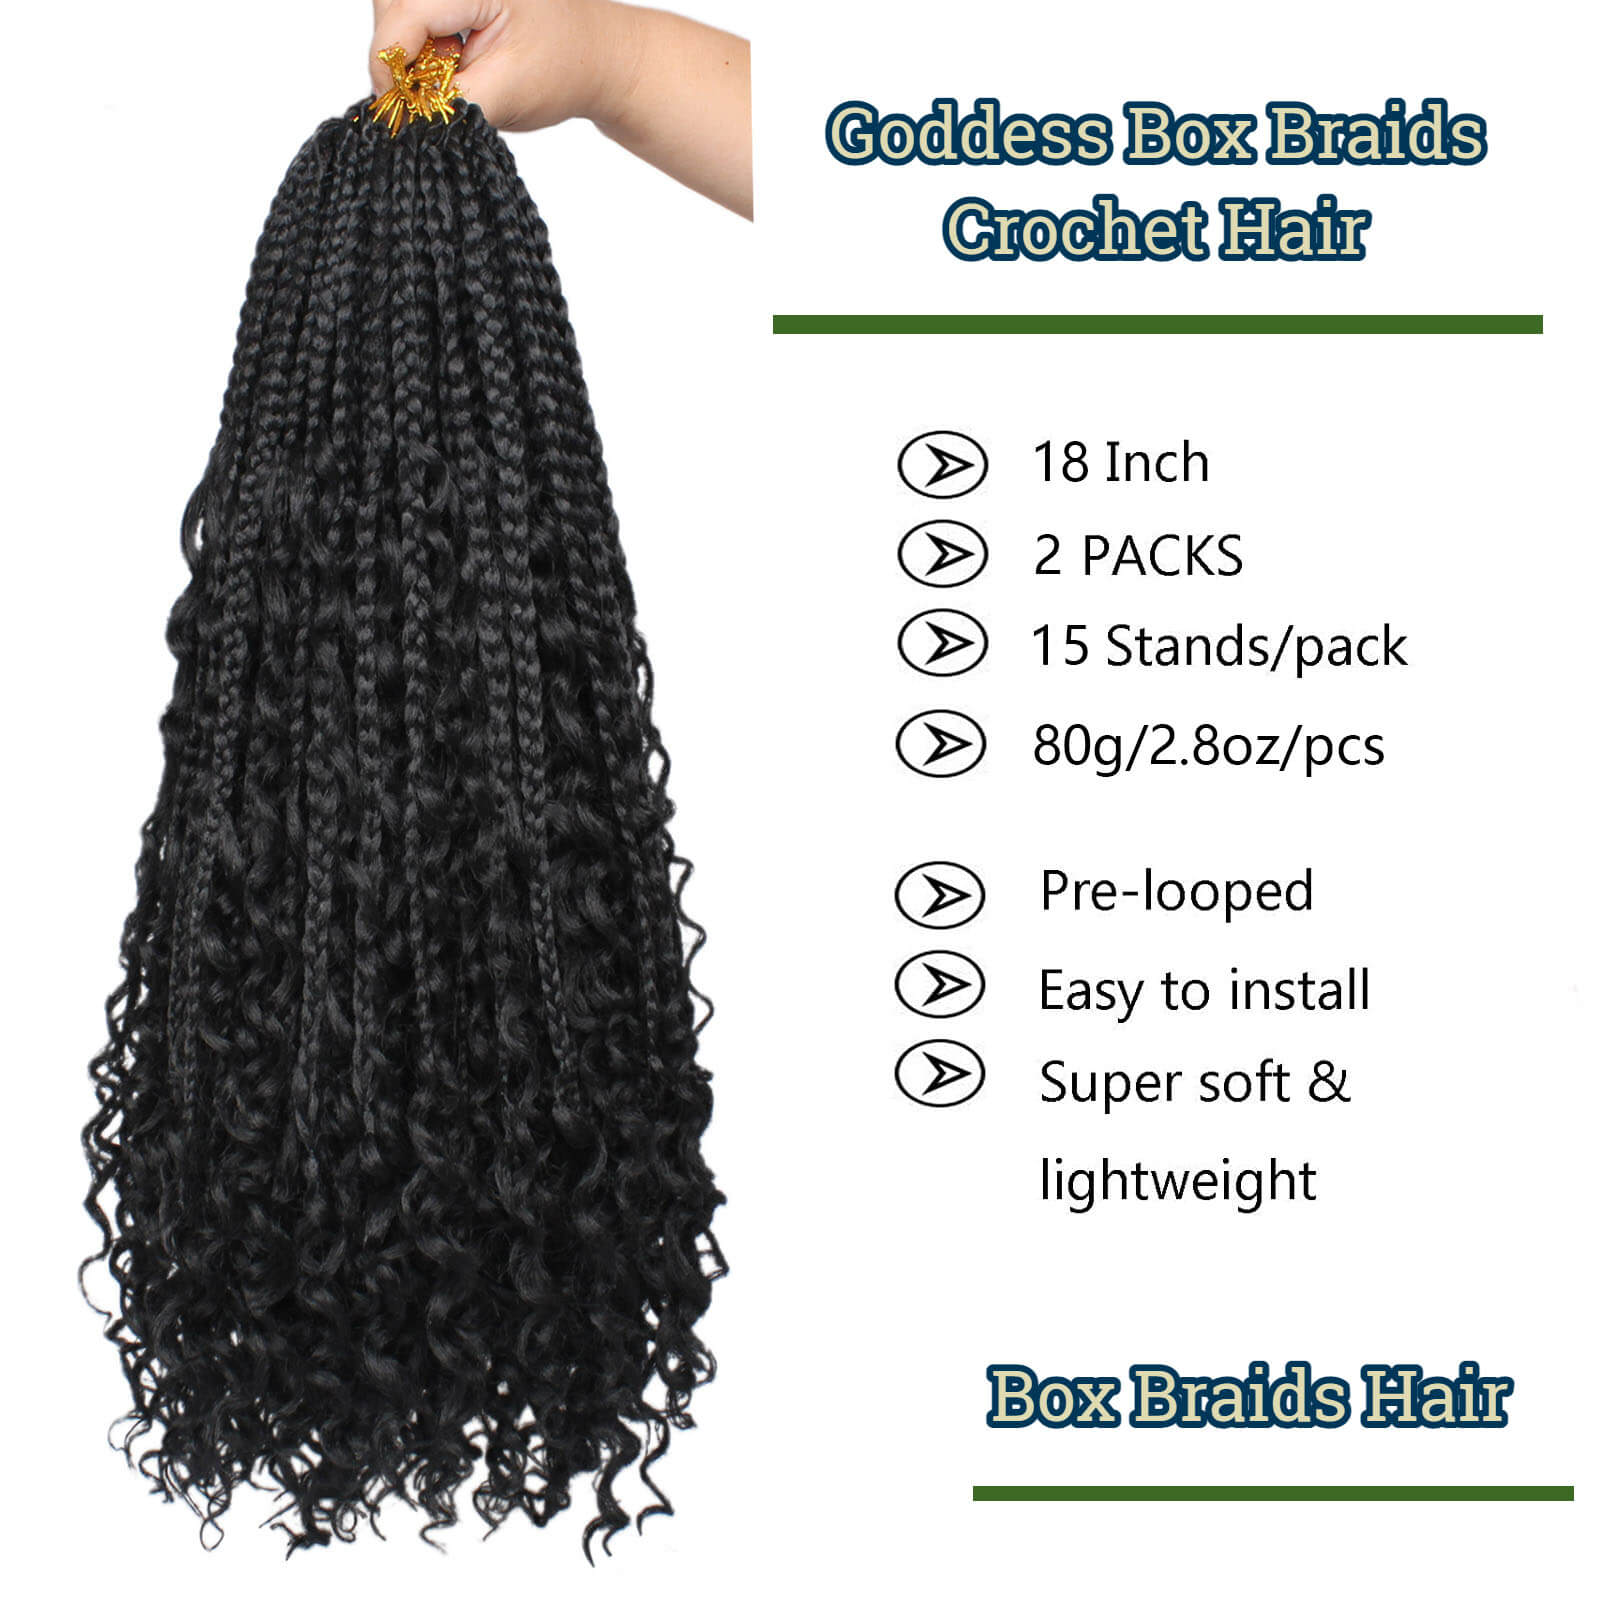 Goddess Box Braids Crochet Hair Bohomian Ombre With Curly End 1420&22  Synthetic Box River Crochet Braiding Hair Extensions